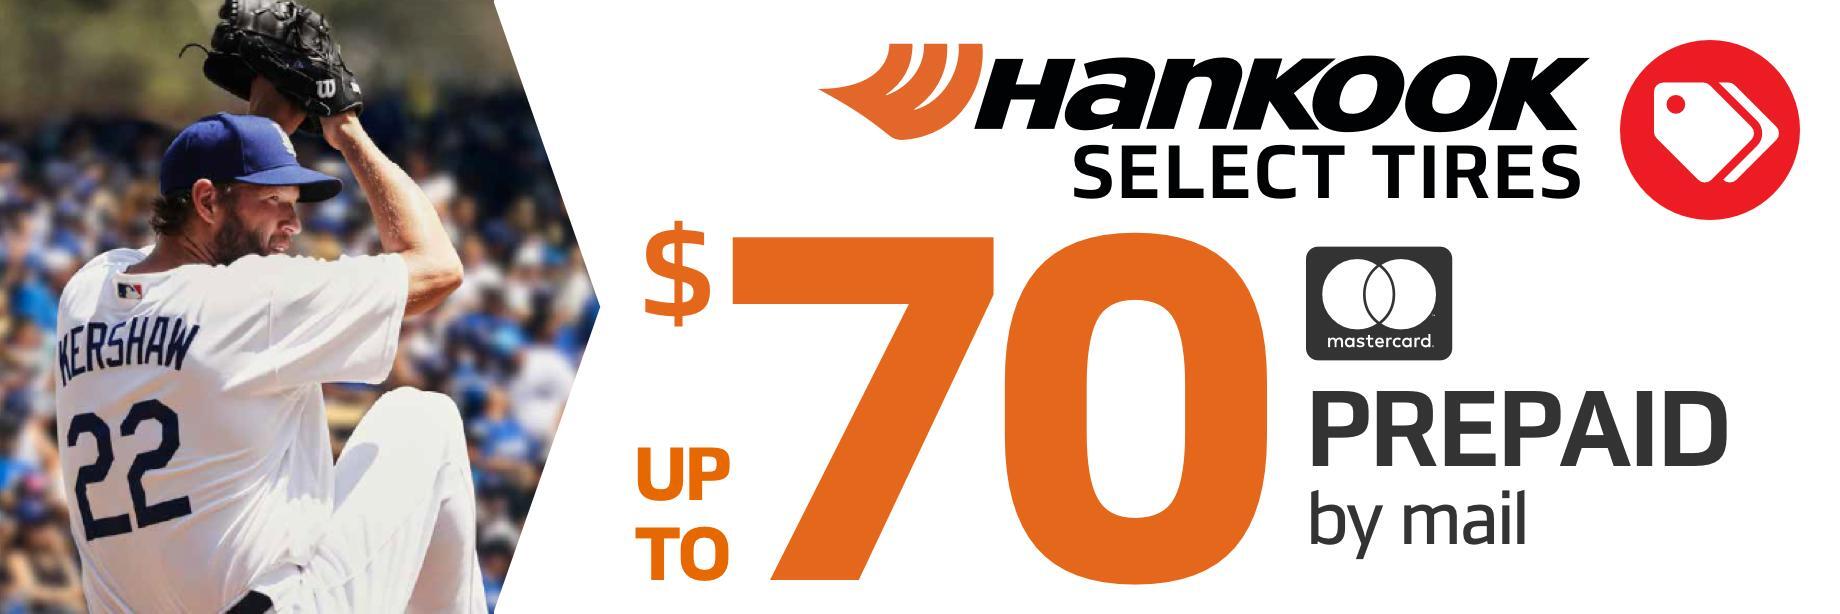 Hankook tire rebate for May 2021 with Discount Tire Direct